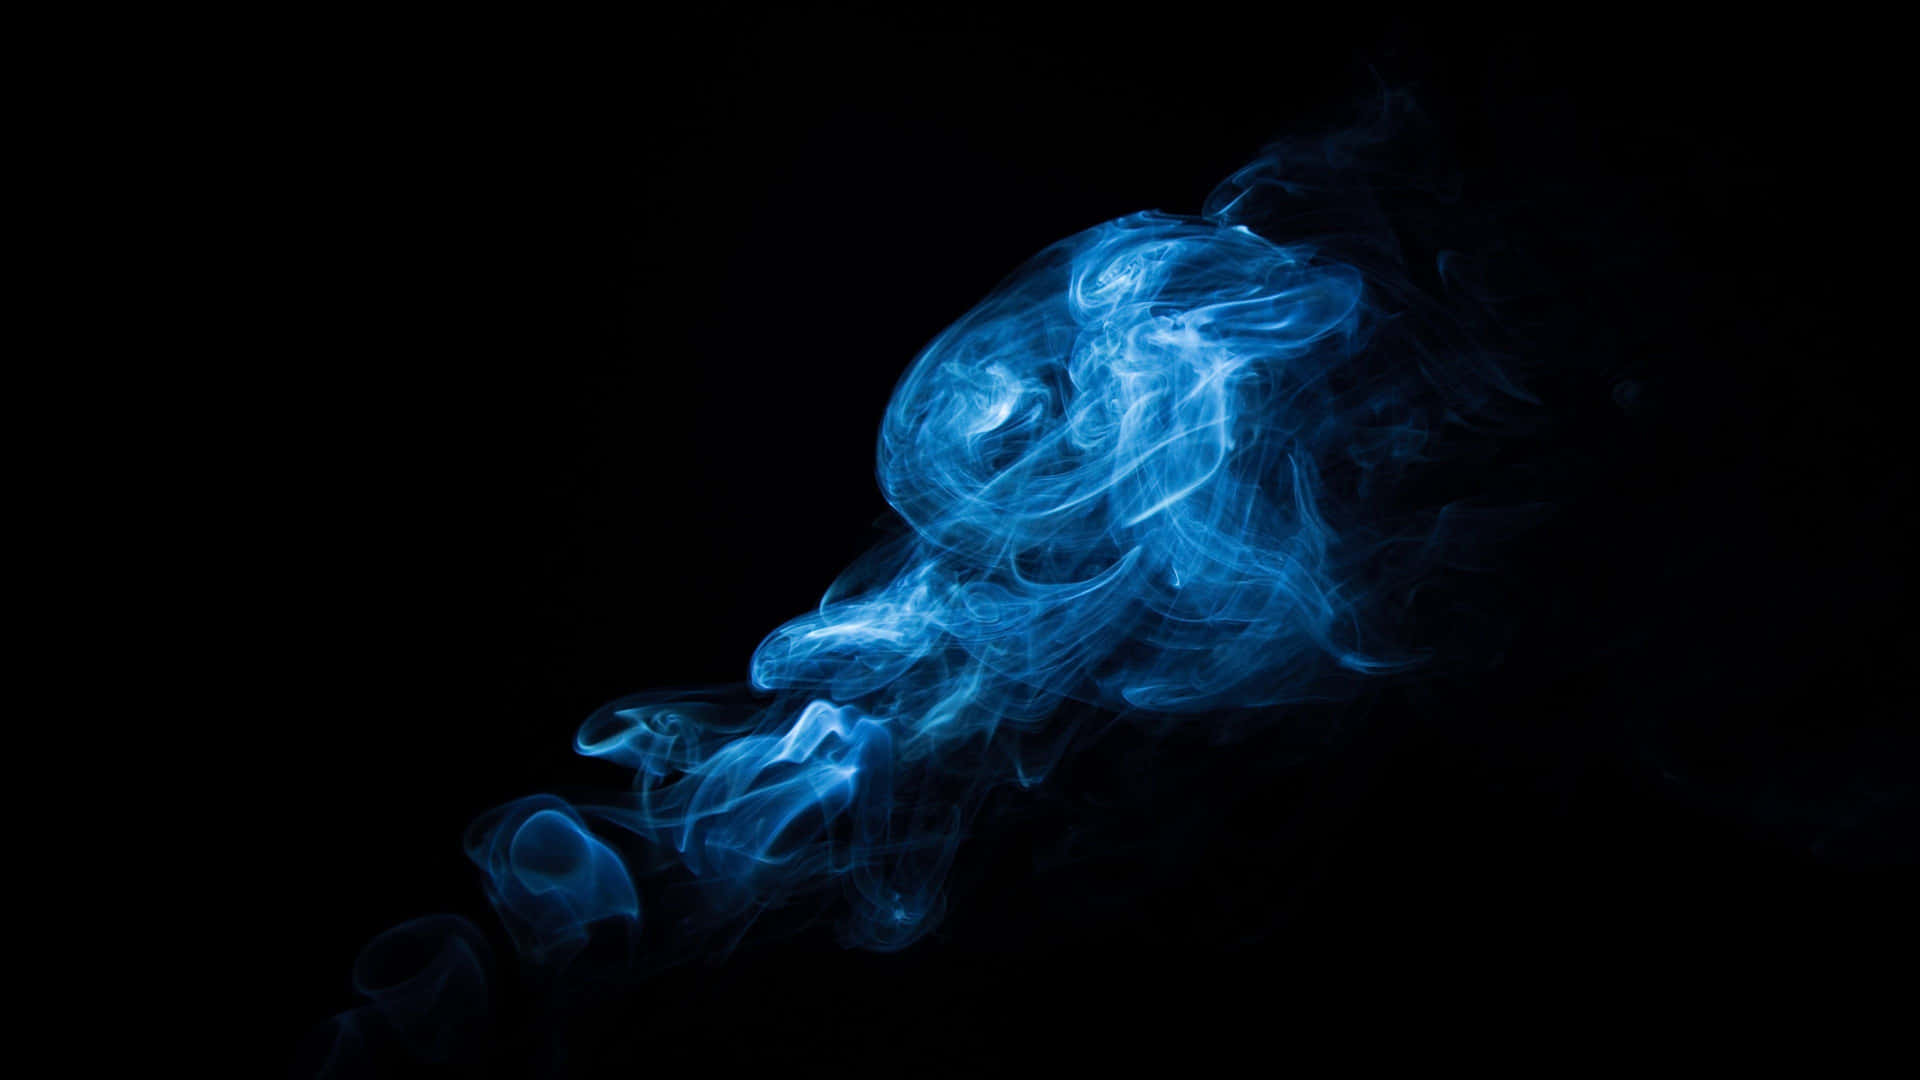 “The captivating beauty of smoke dancing in the night sky” Wallpaper